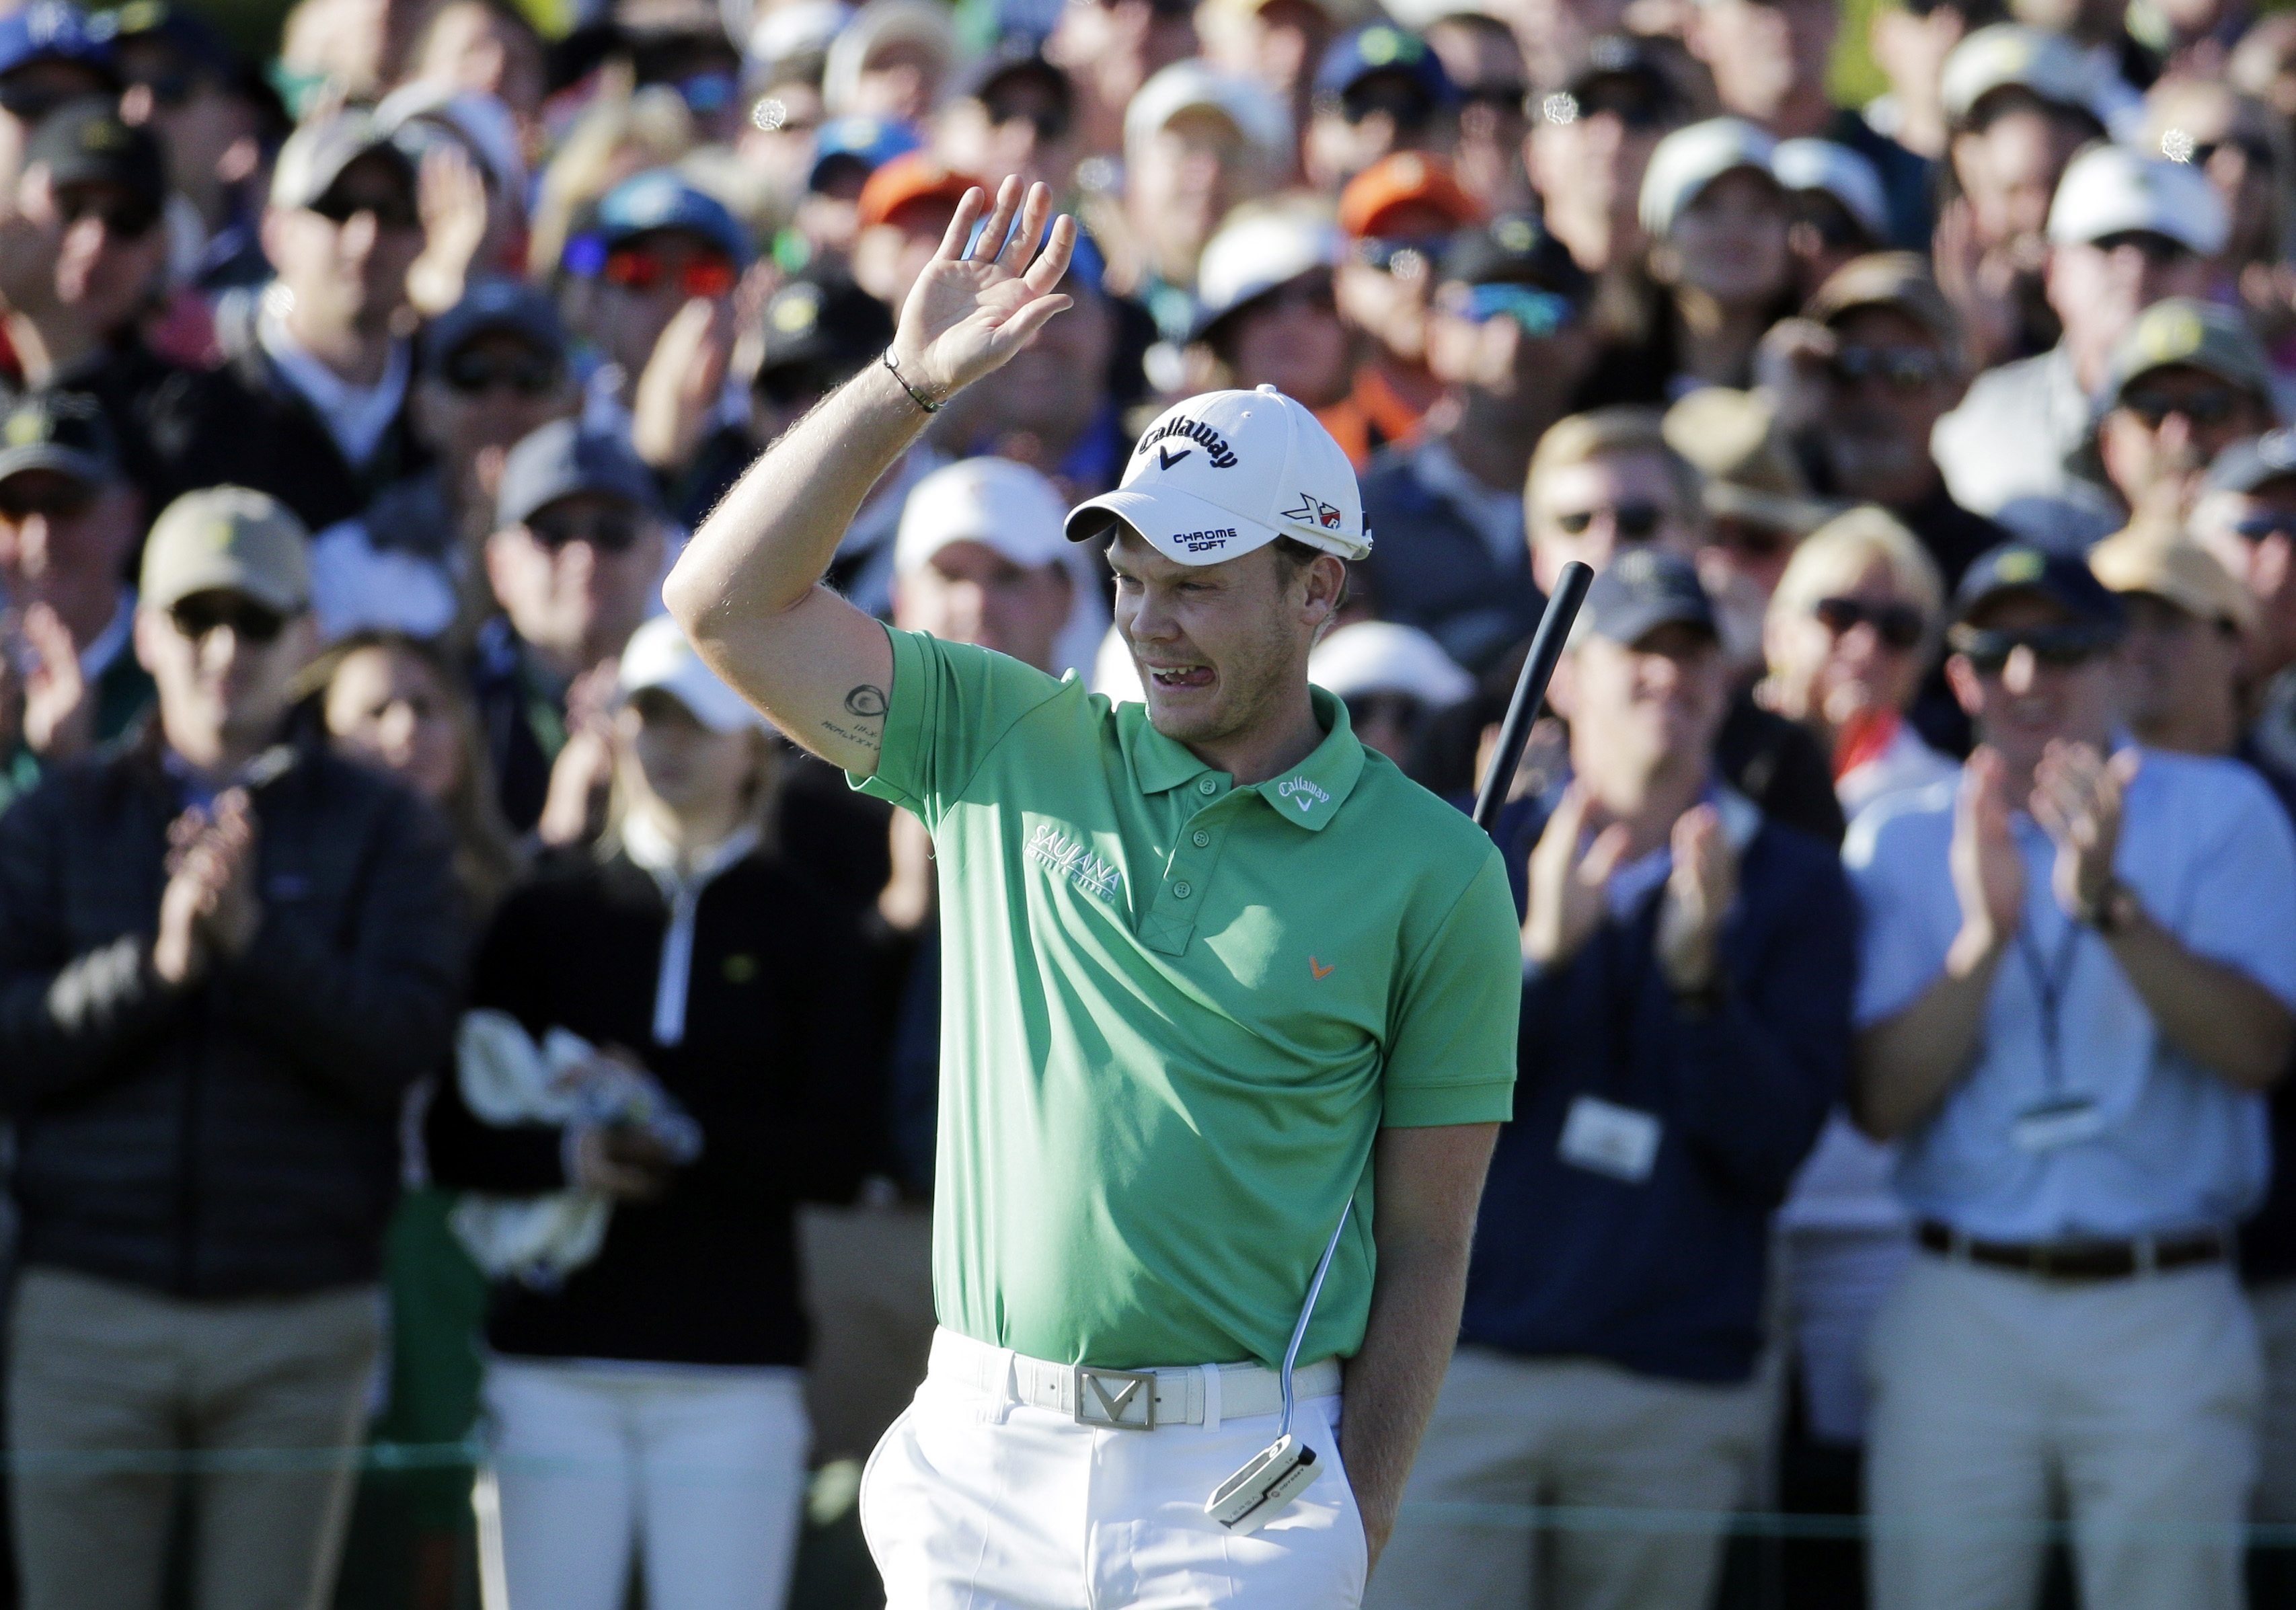 Danny Willett, of England, celebrates on the 18th hole after finishing the final round of the Masters golf tournament Sunday, April 10, 2016, in Augusta, Ga.